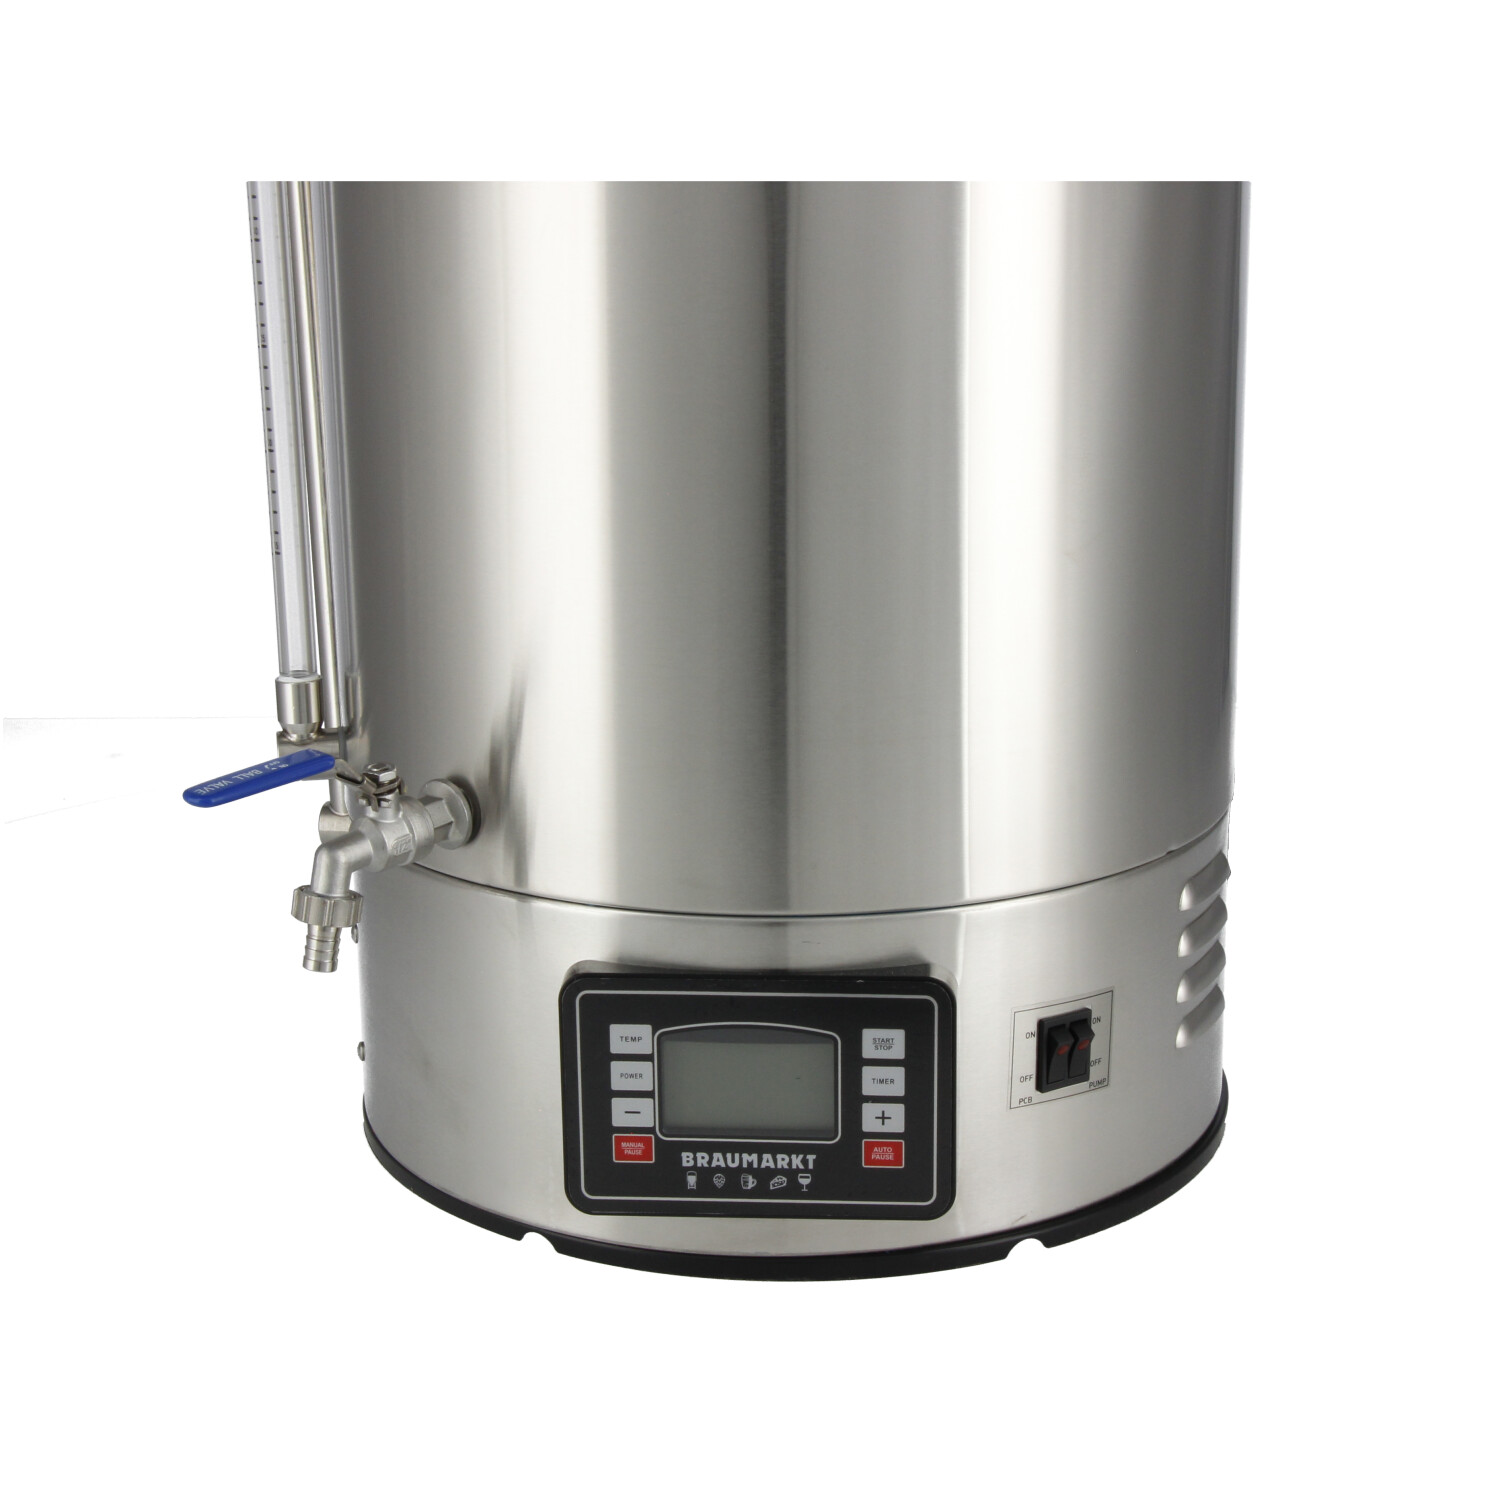 Easybrew SB60T All-in-One Brouwketel